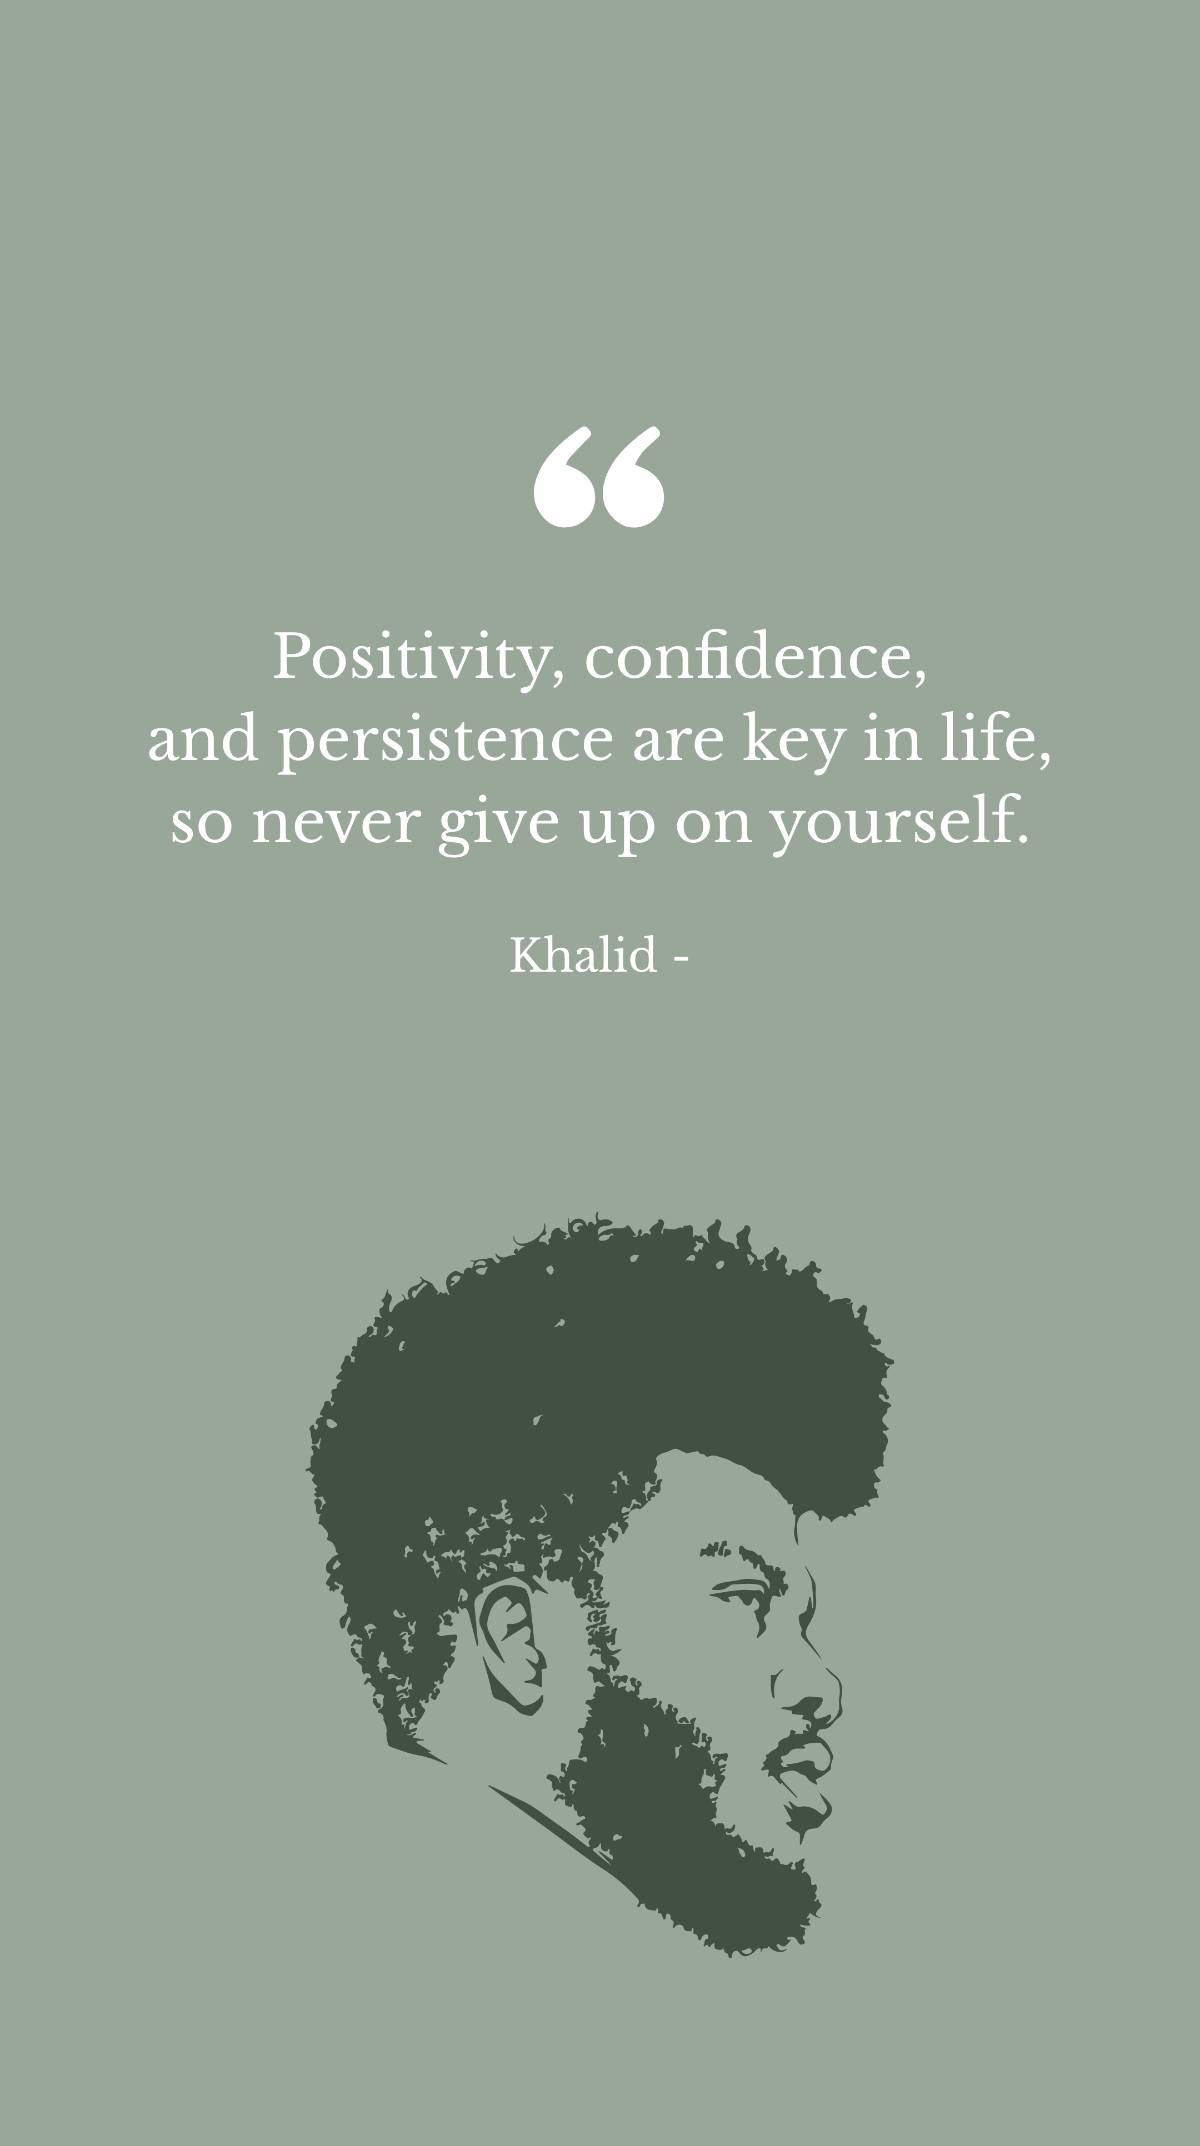 Khalid - Positivity, confidence, and persistence are key in life, so never give up on yourself. Template